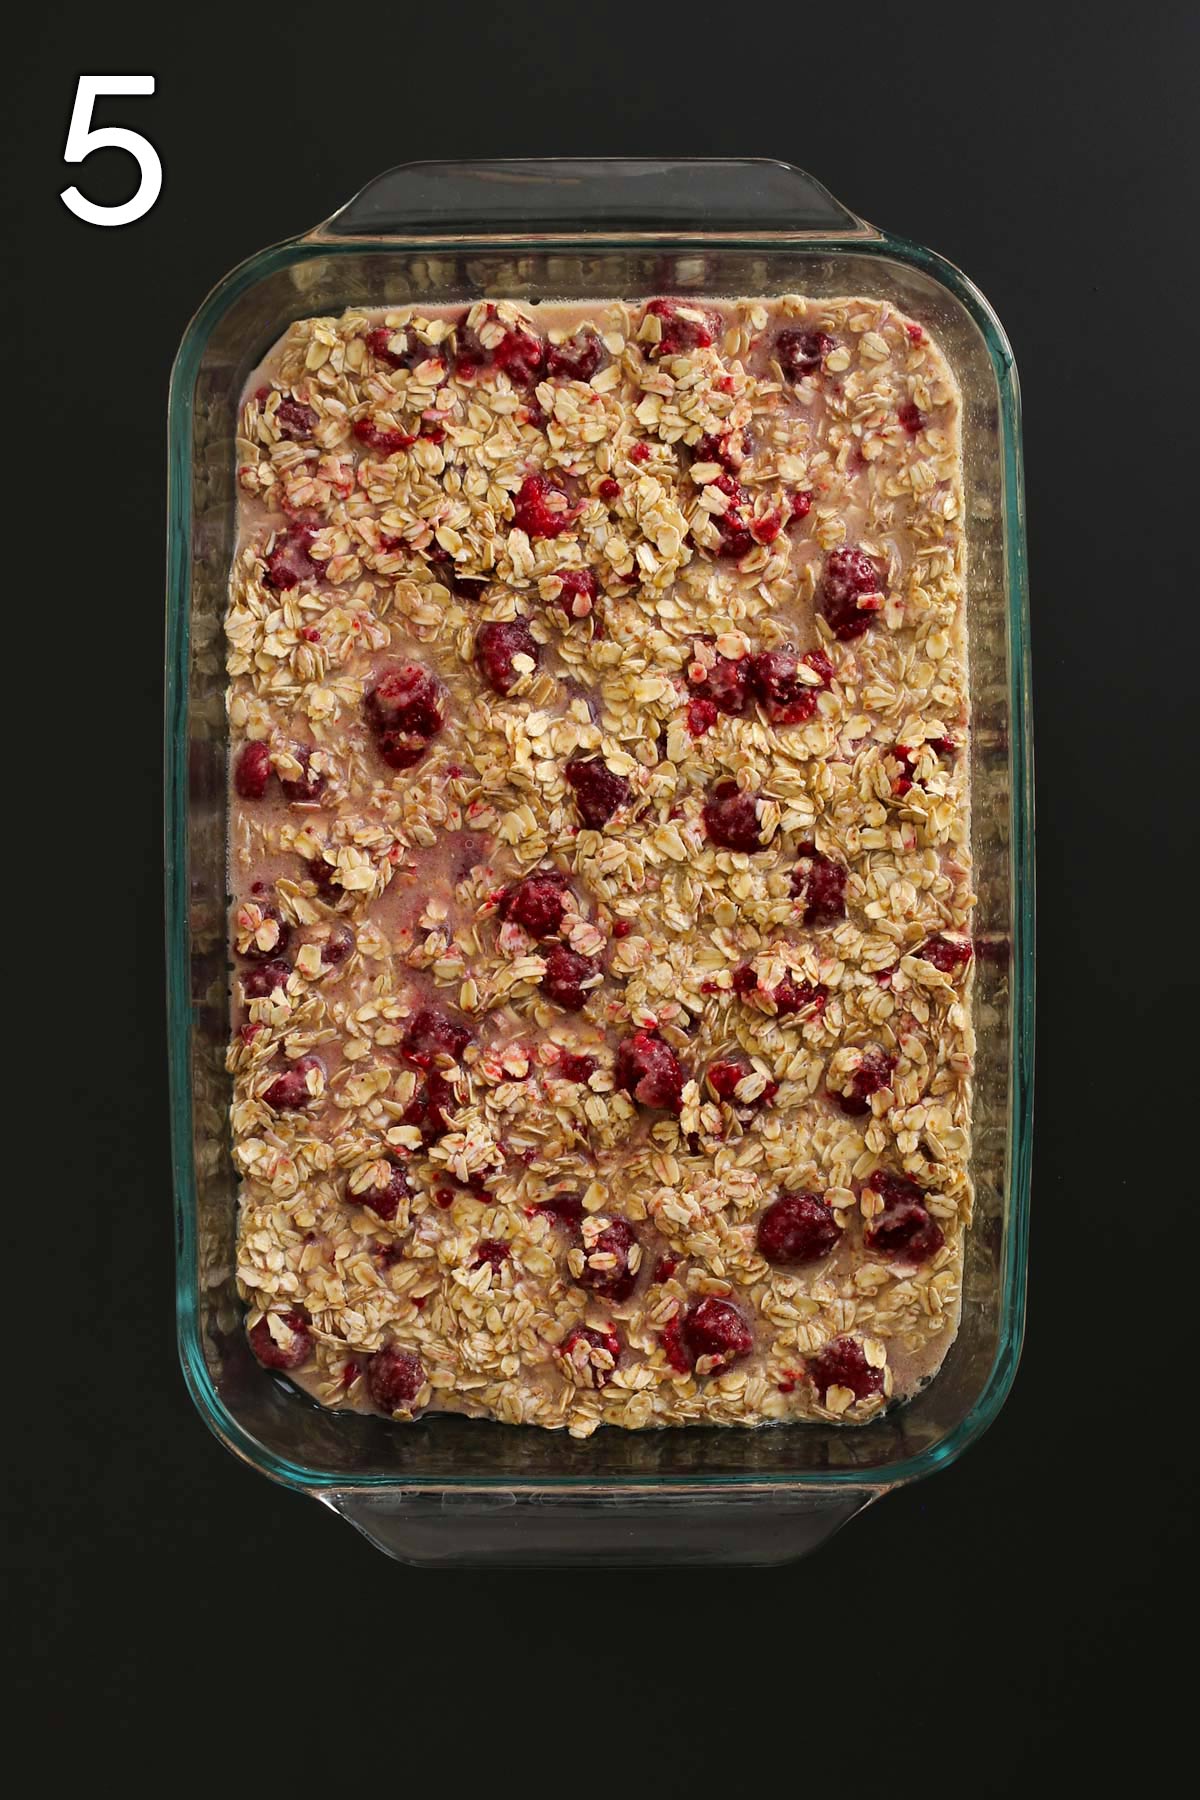 oatmeal mixture spooned into 9x13-inch pan on black table top.